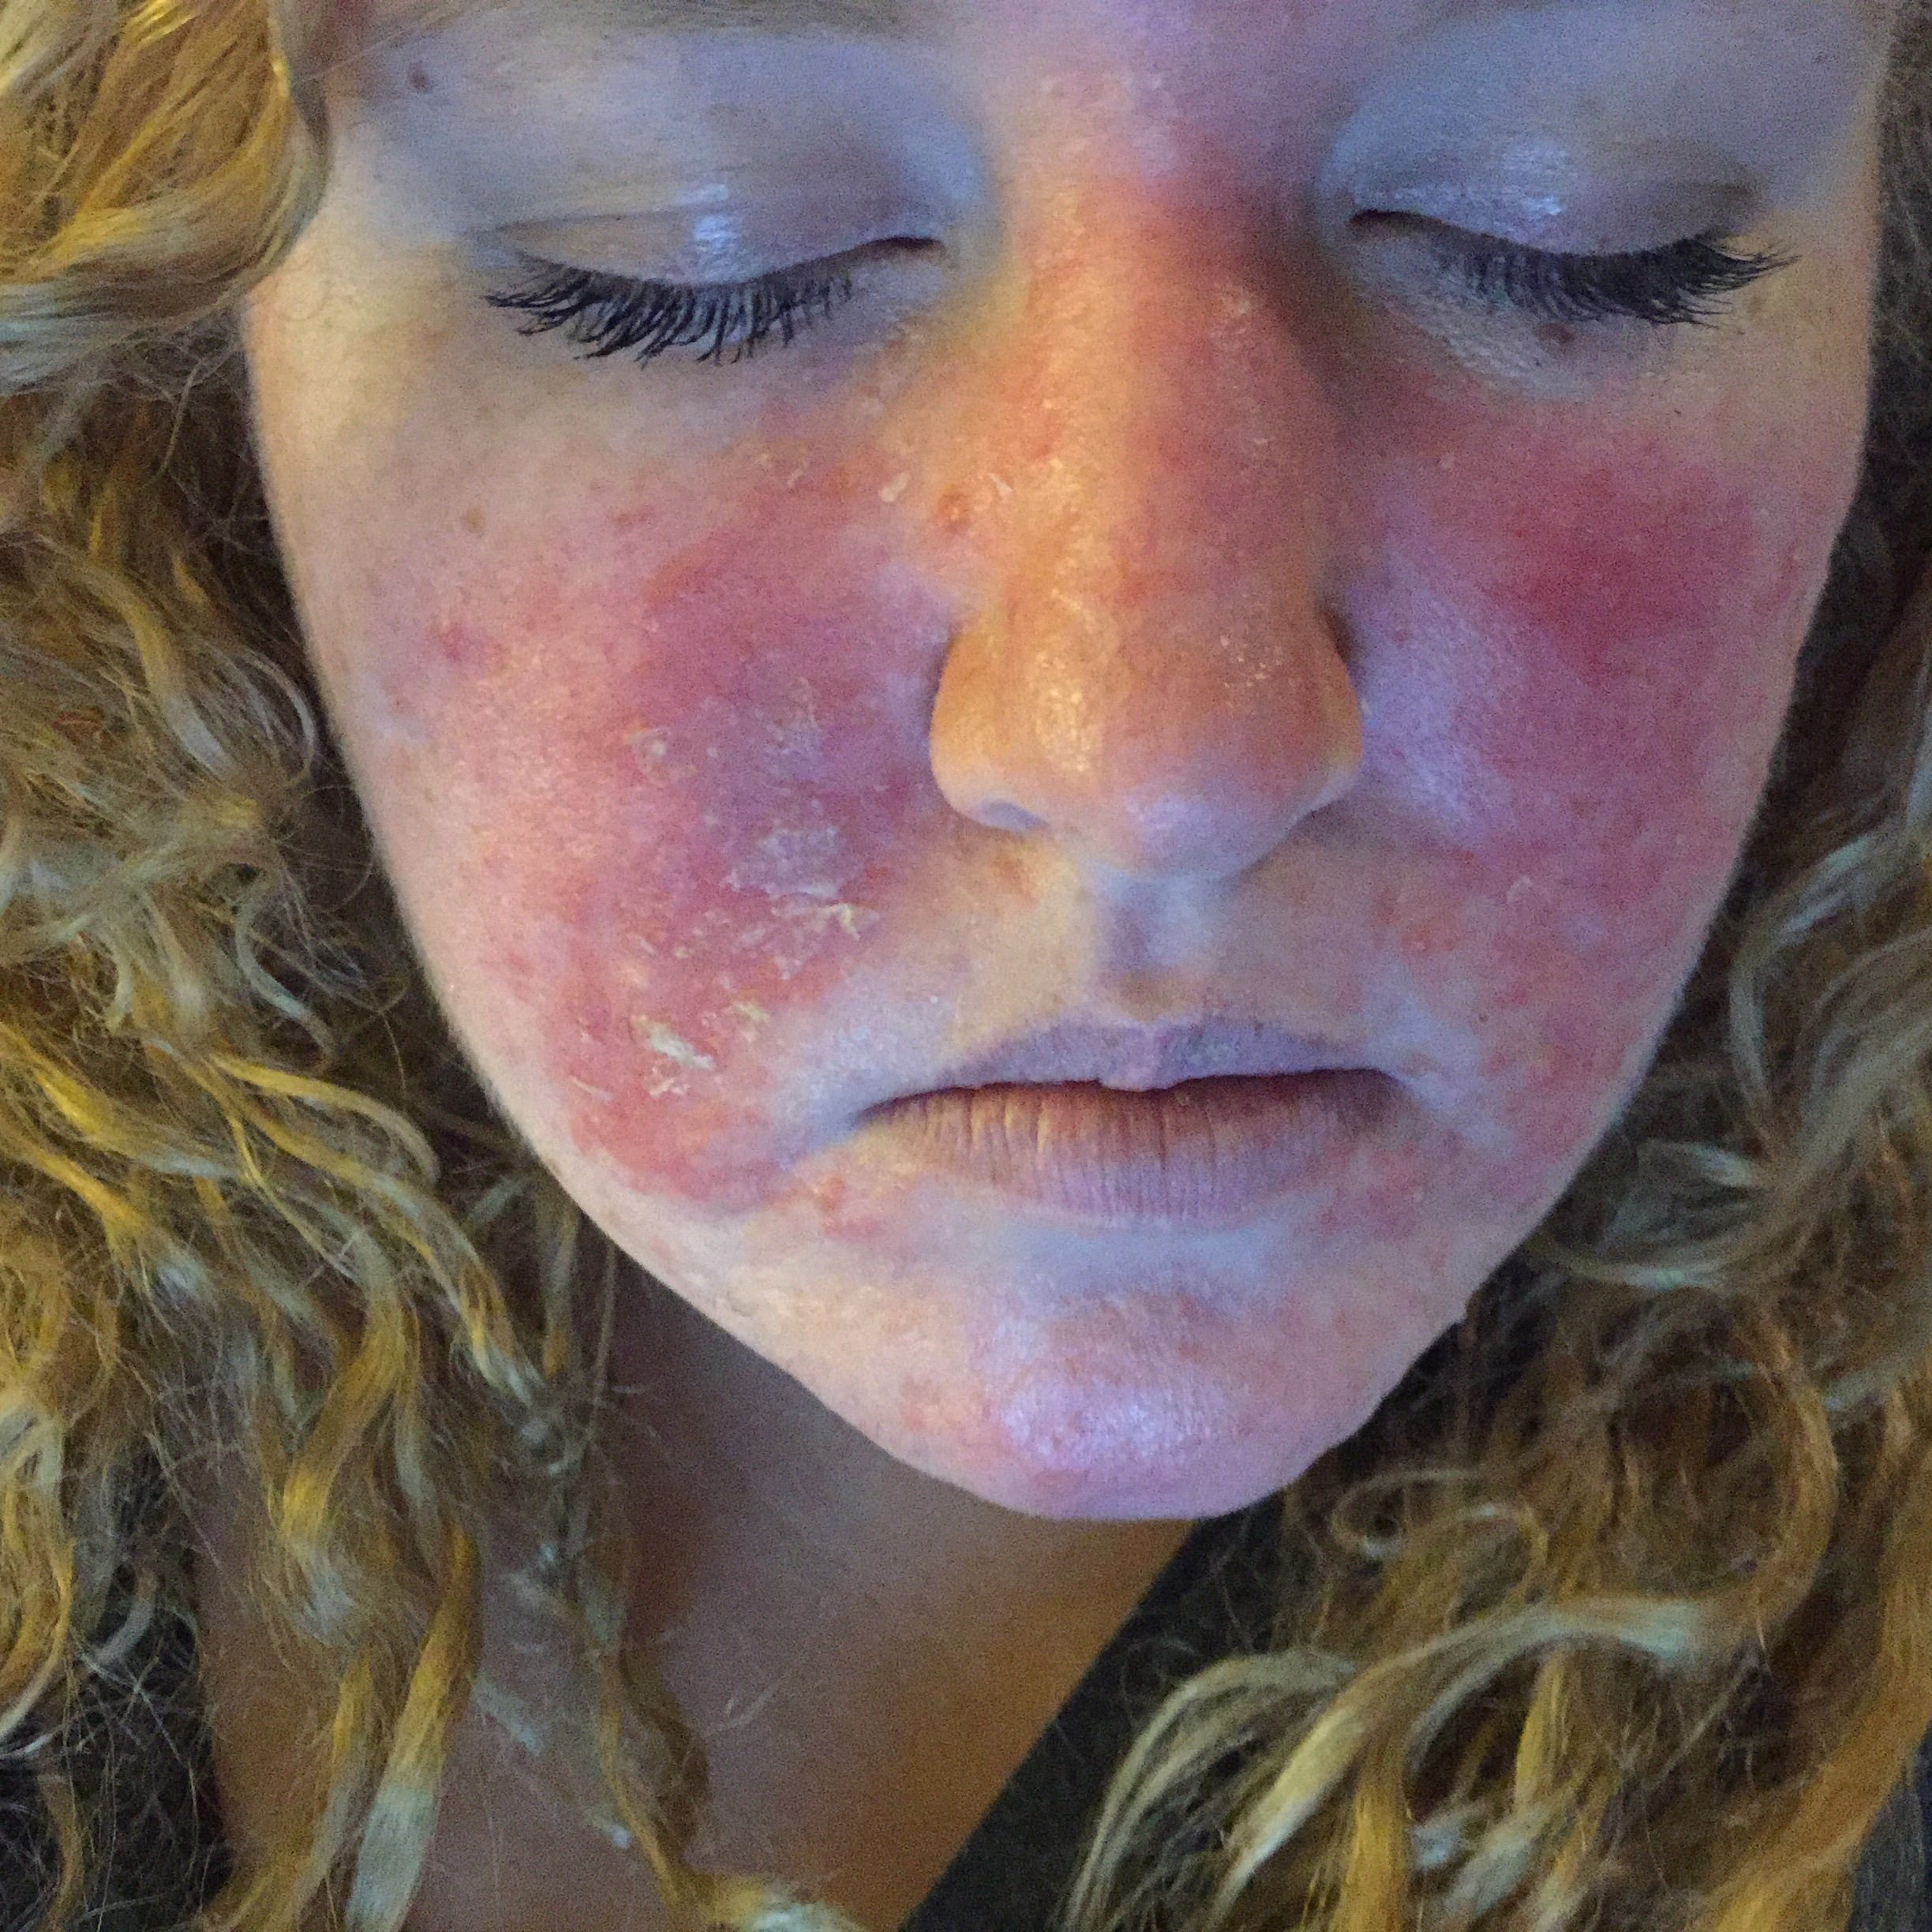 Mom Furious After Rash Caused By Popular Makeup Wipes